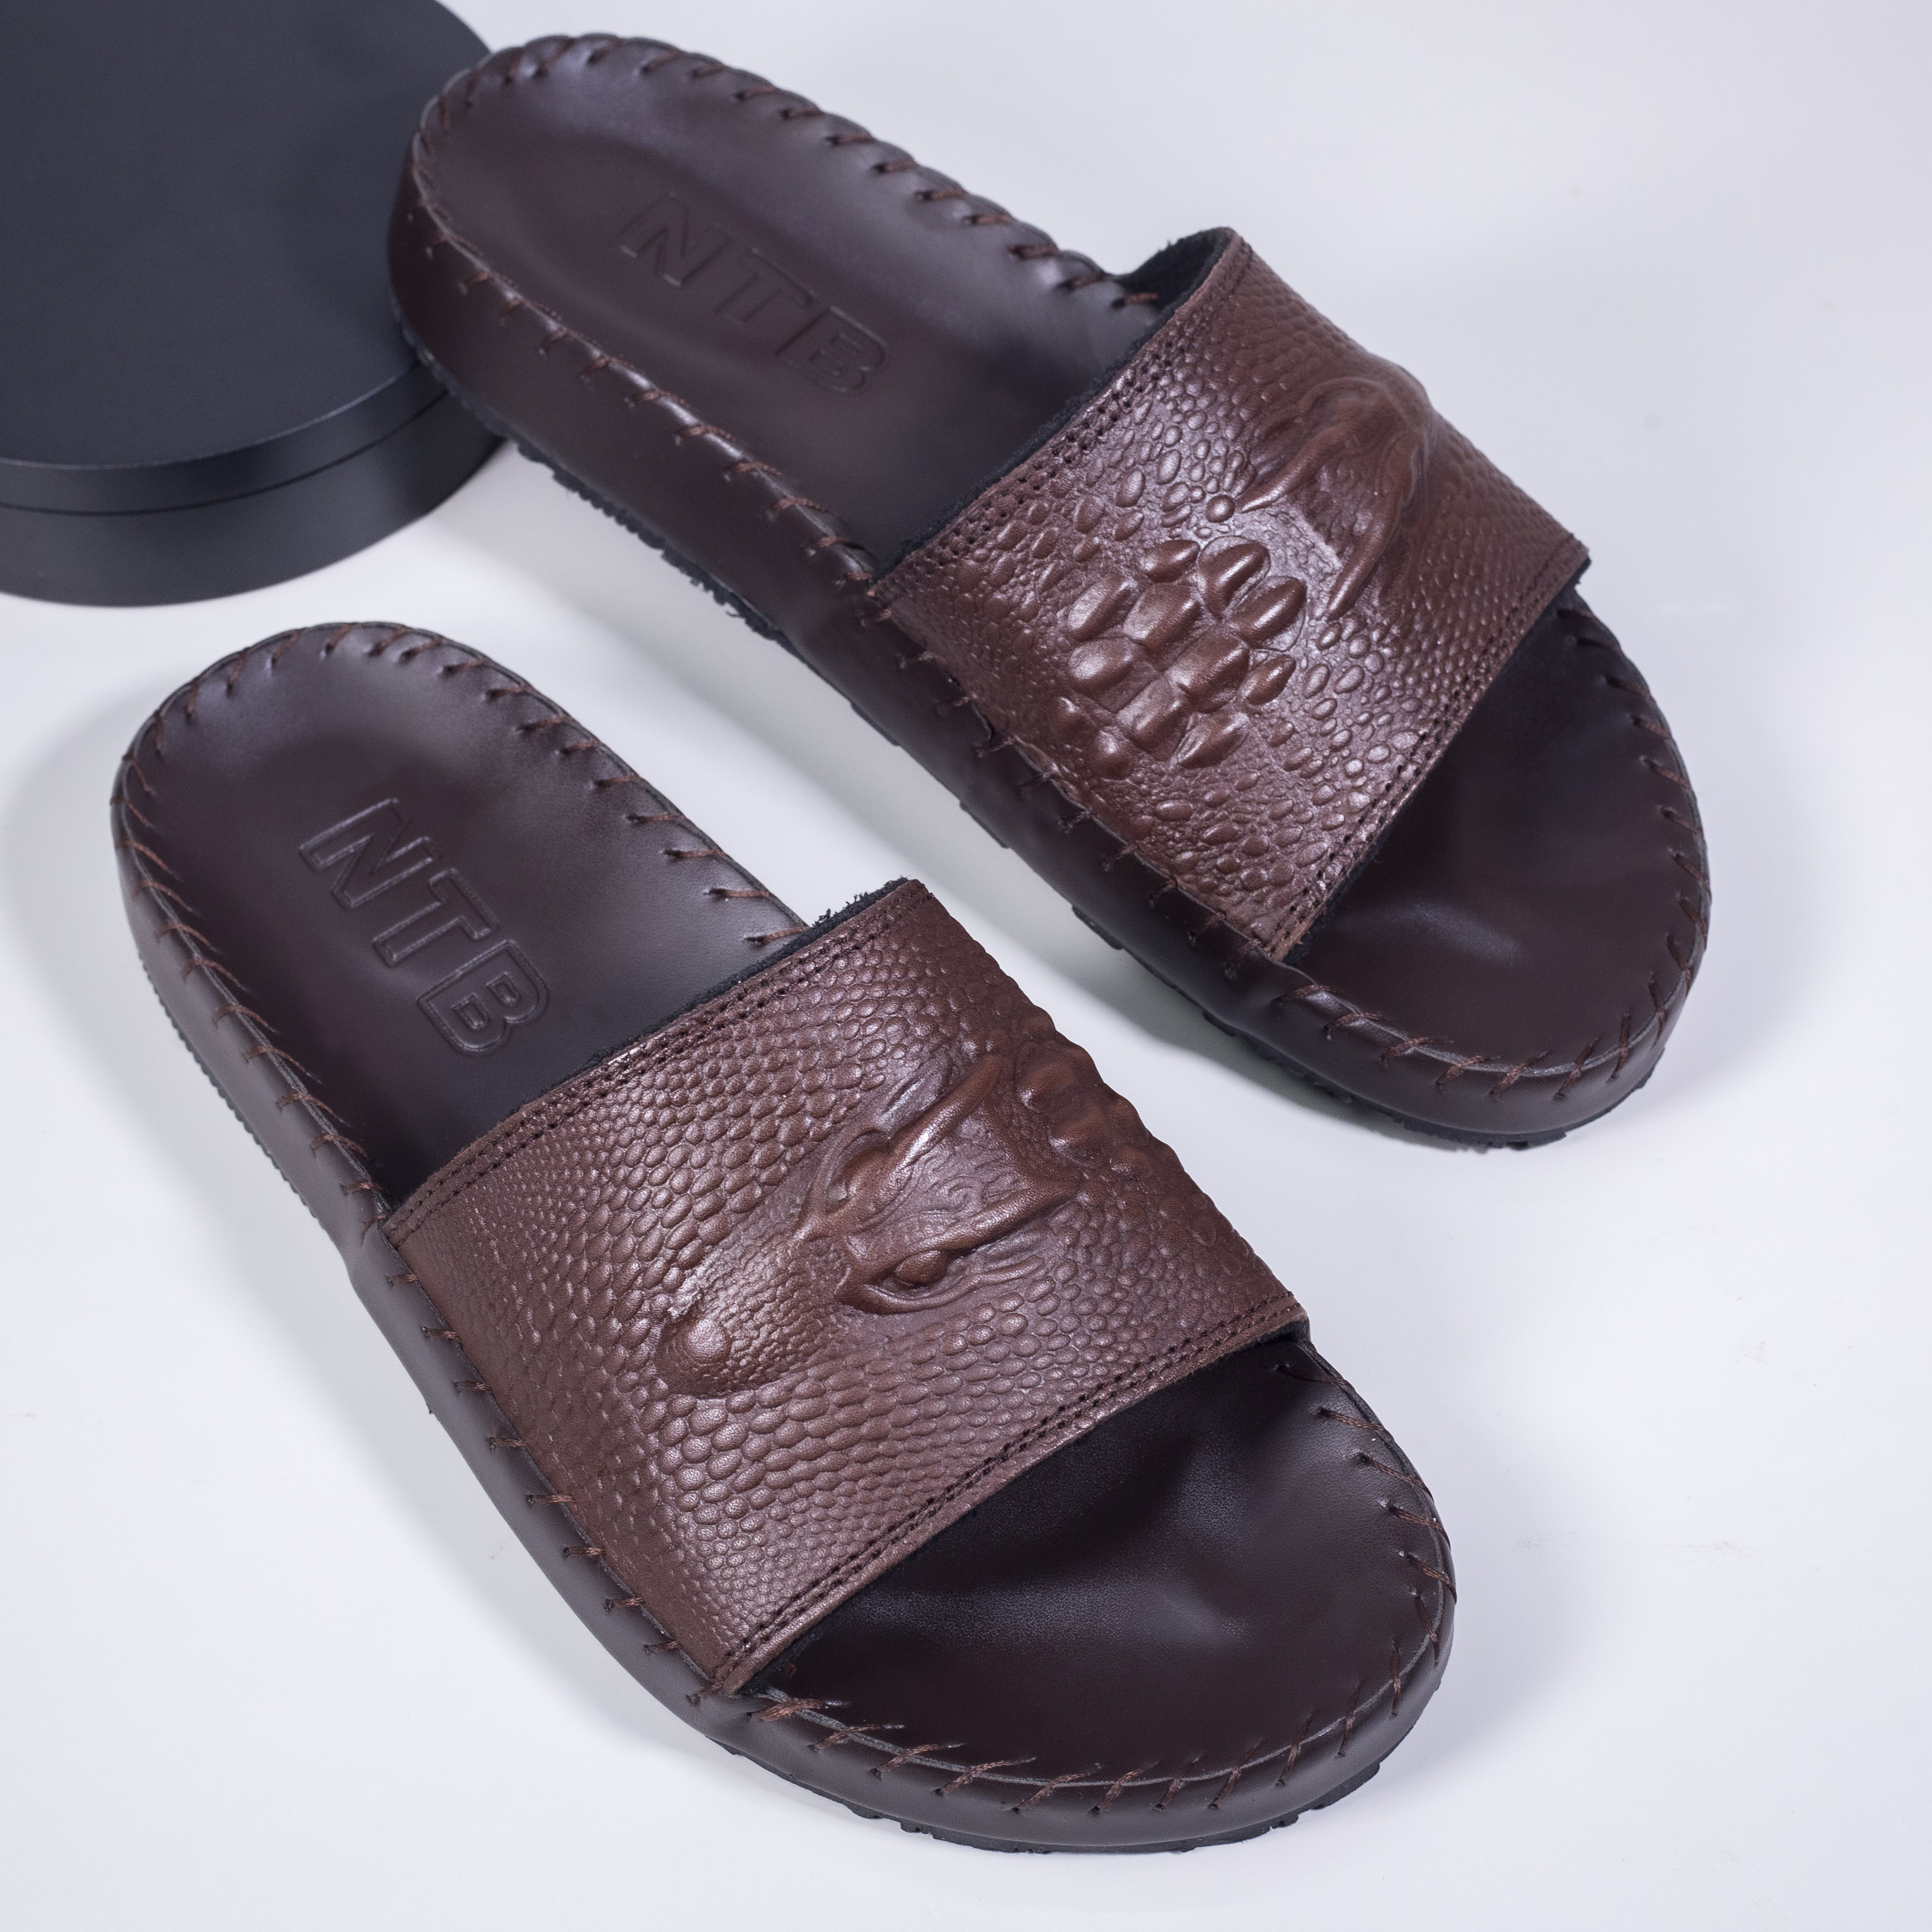 Ho Chi Minh men s cowhide leather sandals with horizontal strap stitching